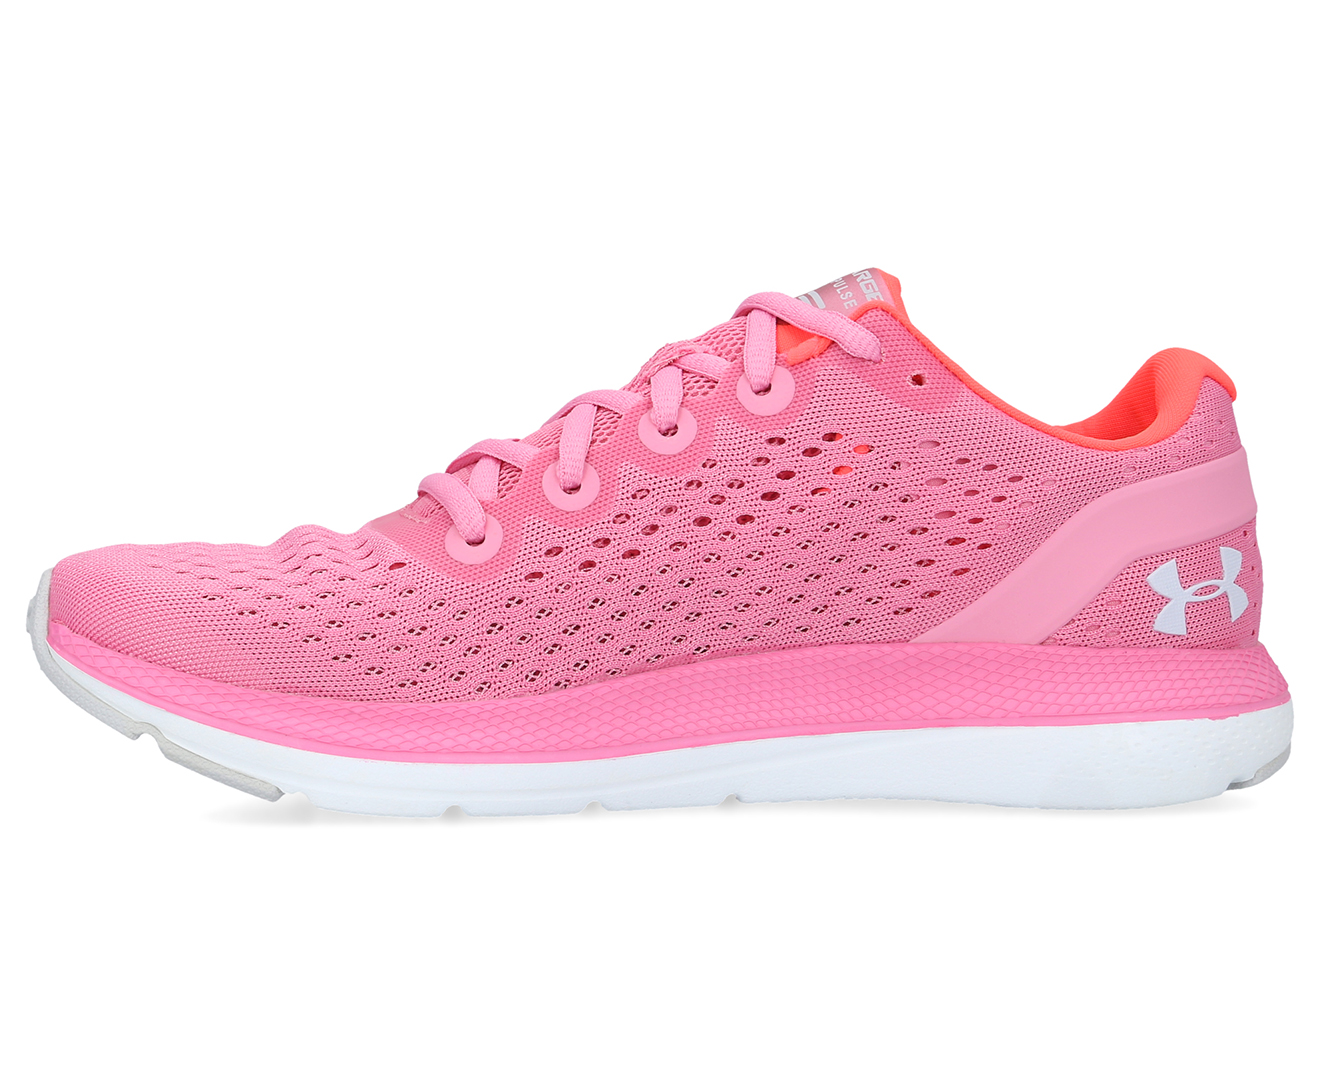 Under Armour Women's UA Charged Impulse Running Shoes - Pink | Catch.com.au